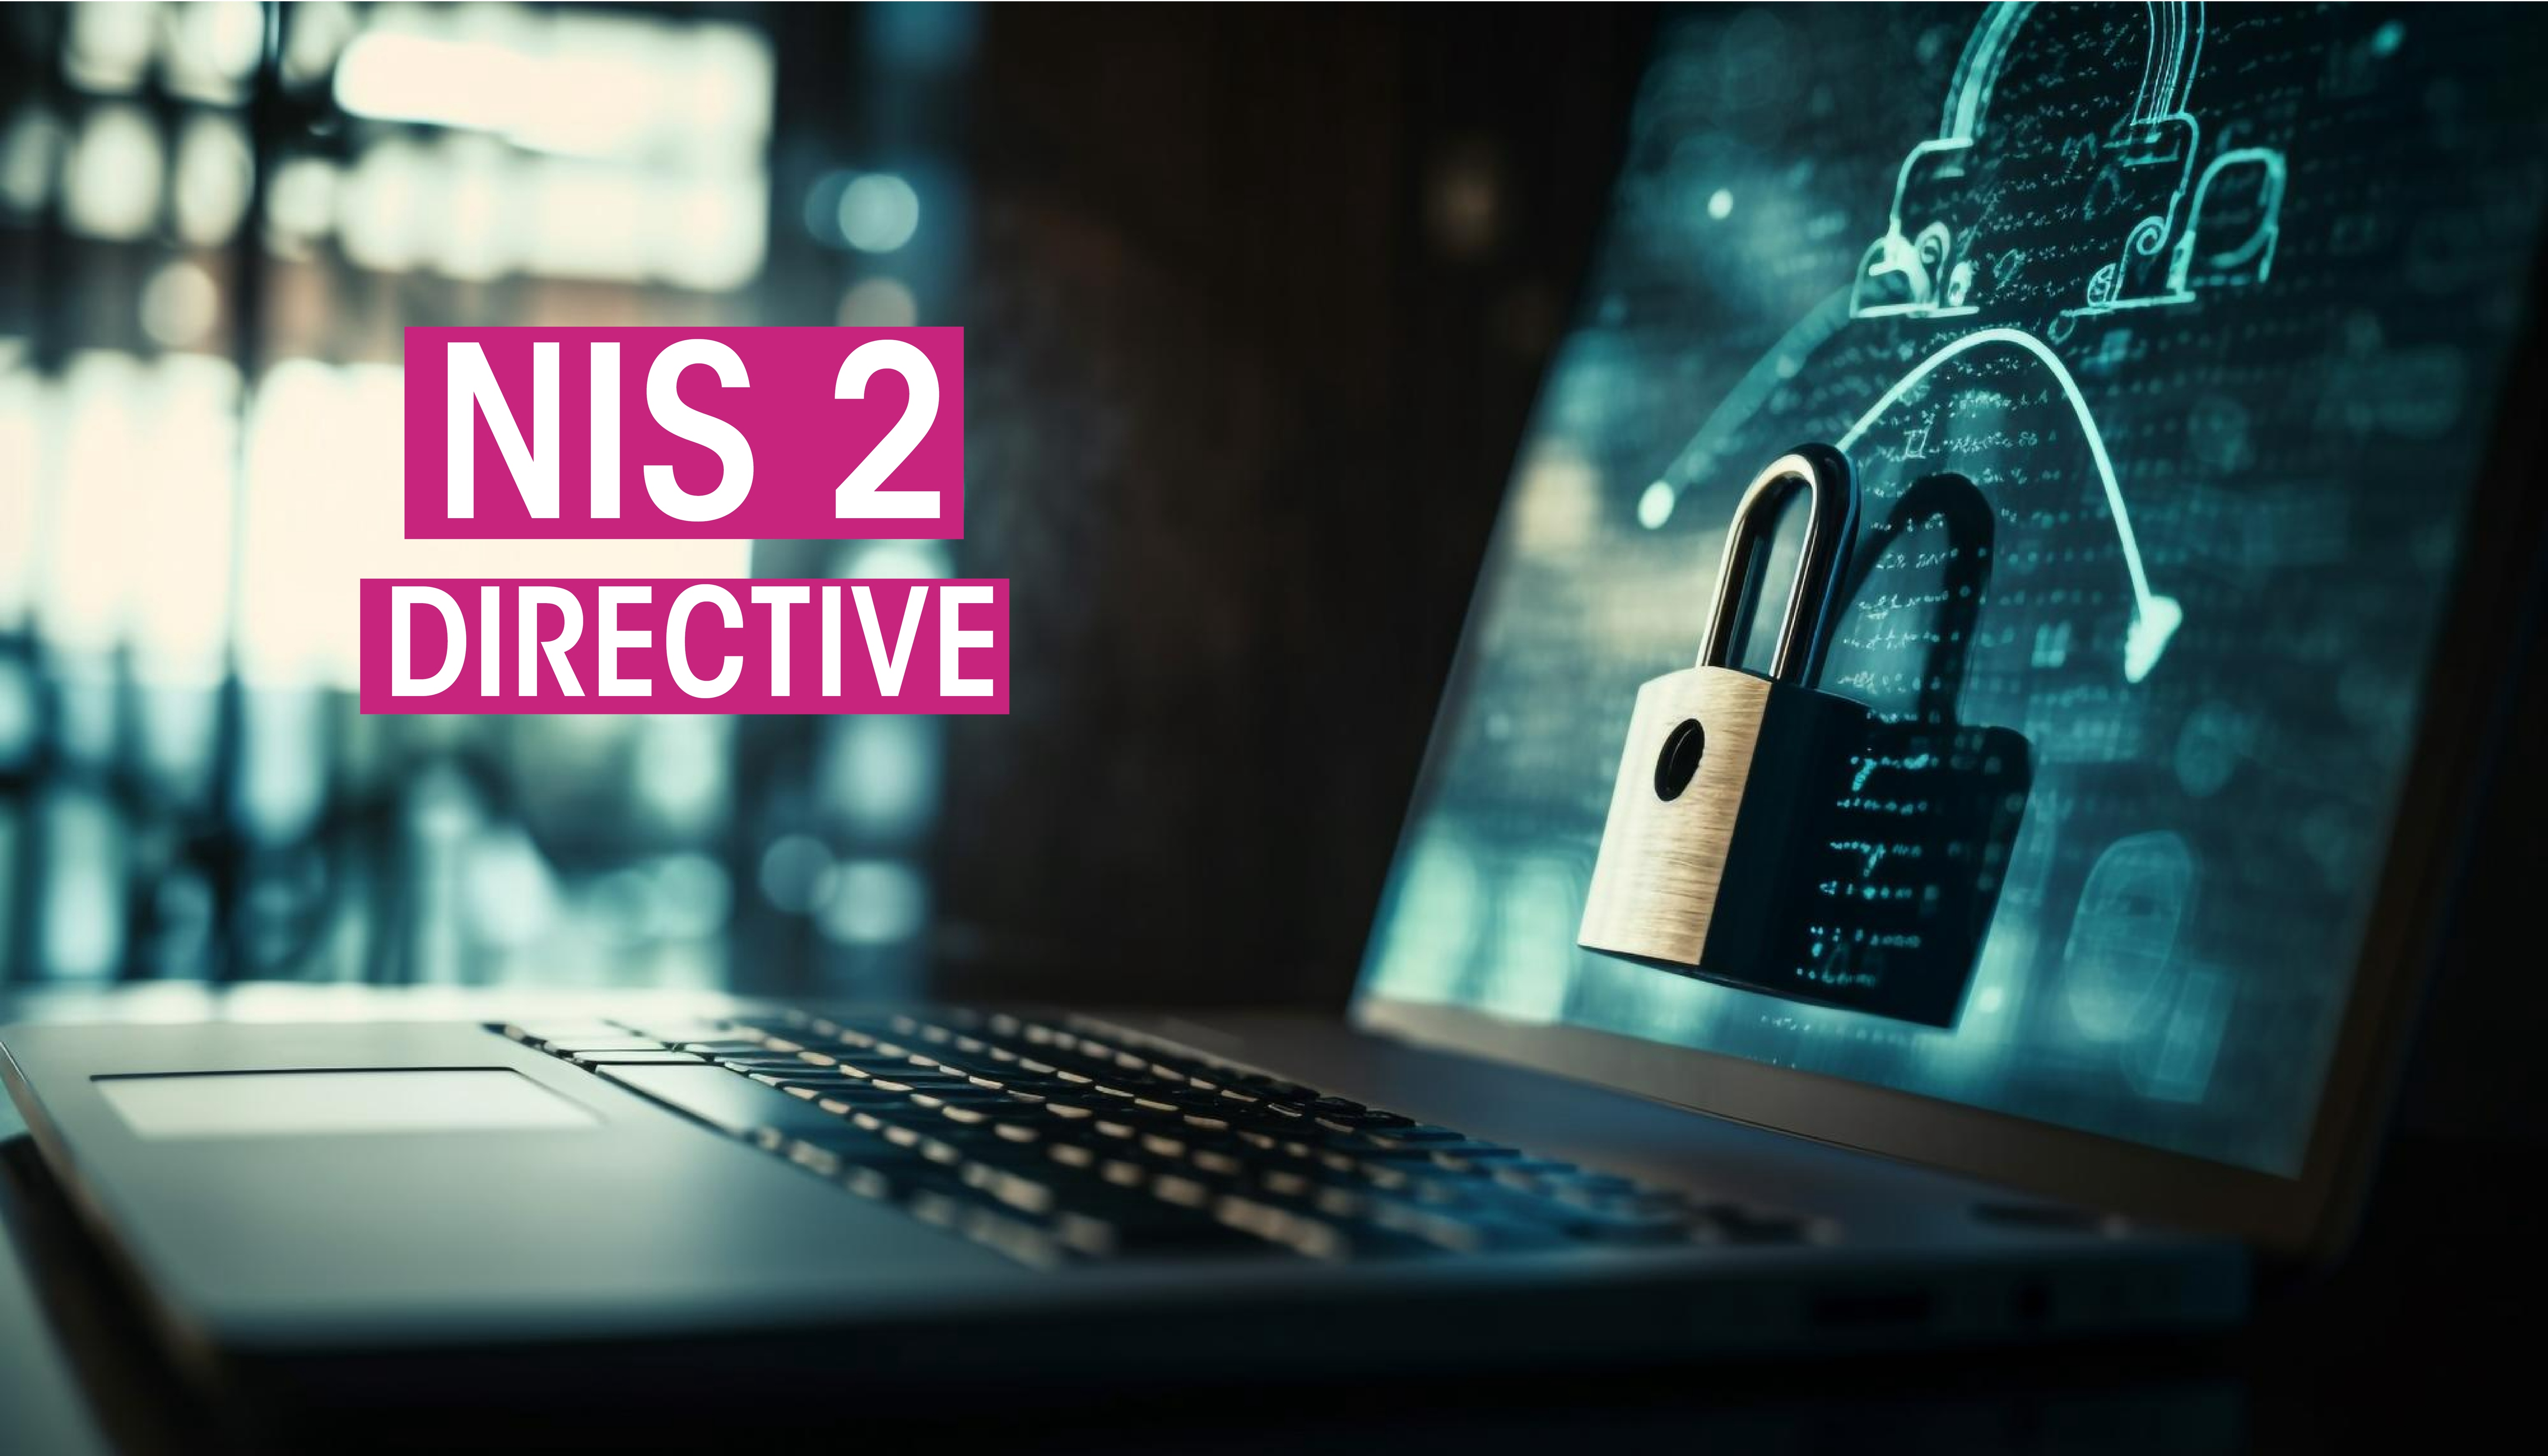 NIS 2: A new directive to strengthen cybersecurity on the European market